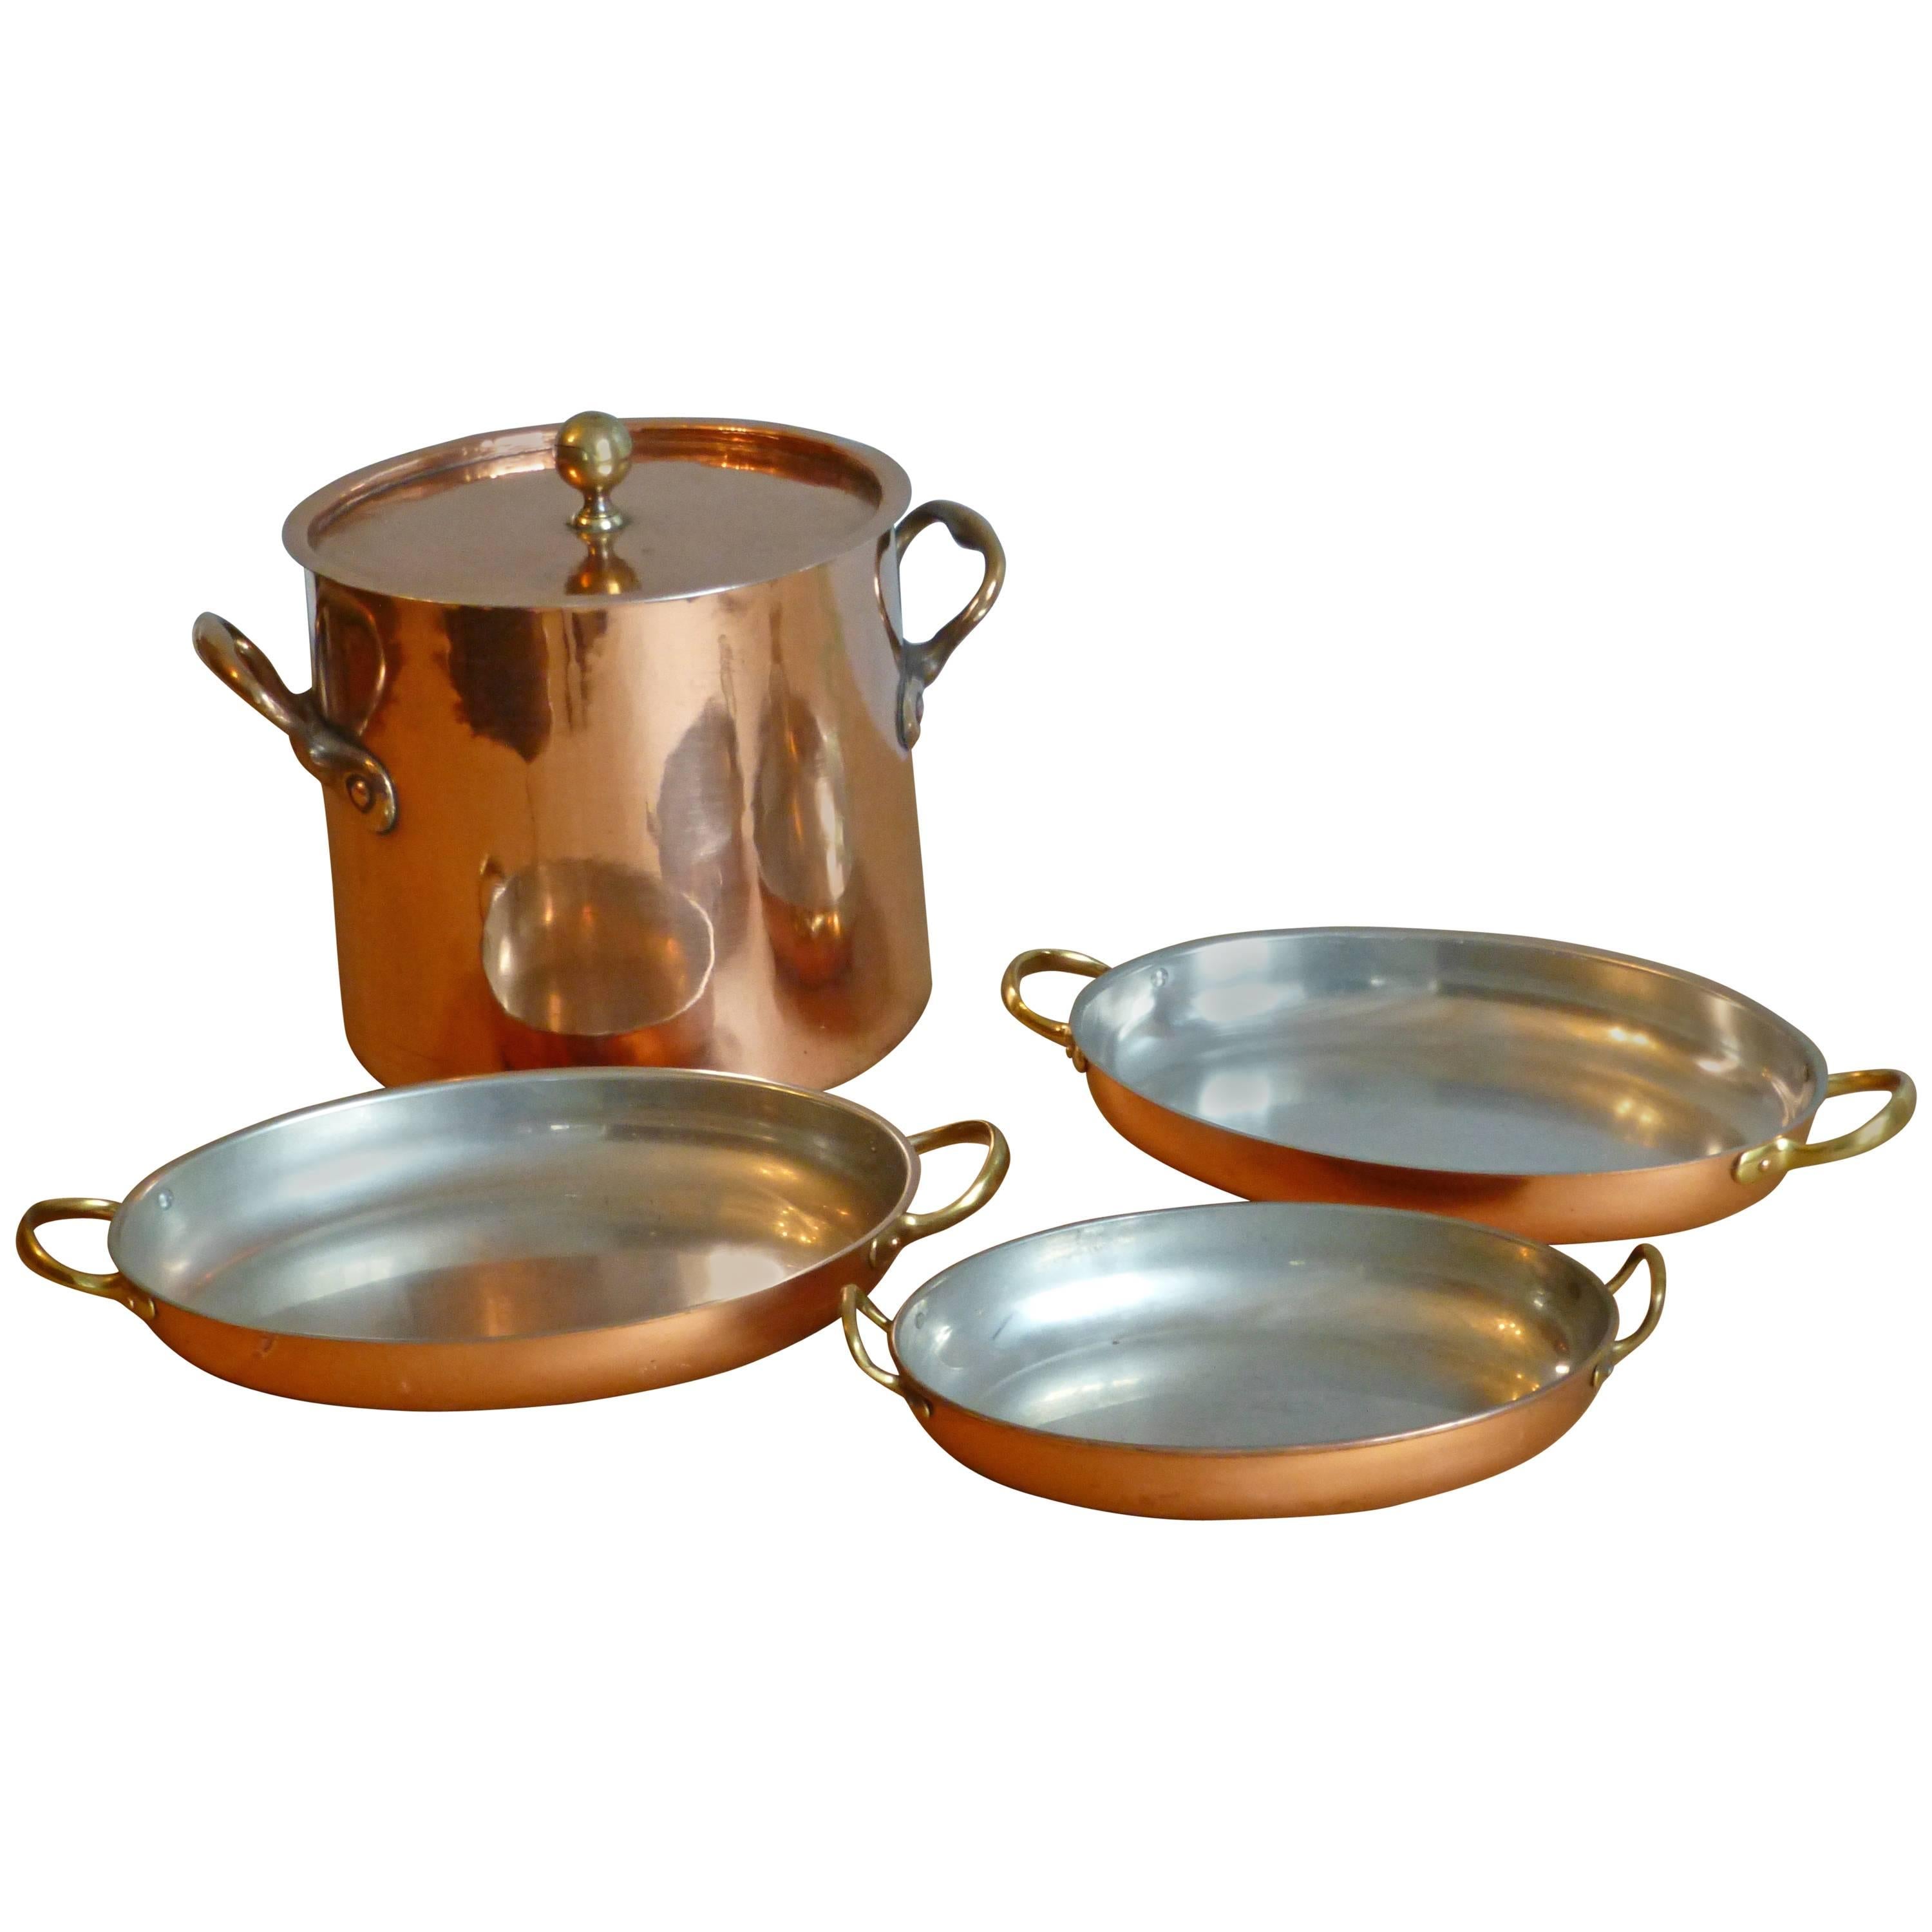 Tinned Set of Copper Stock Pot and Baking Pans